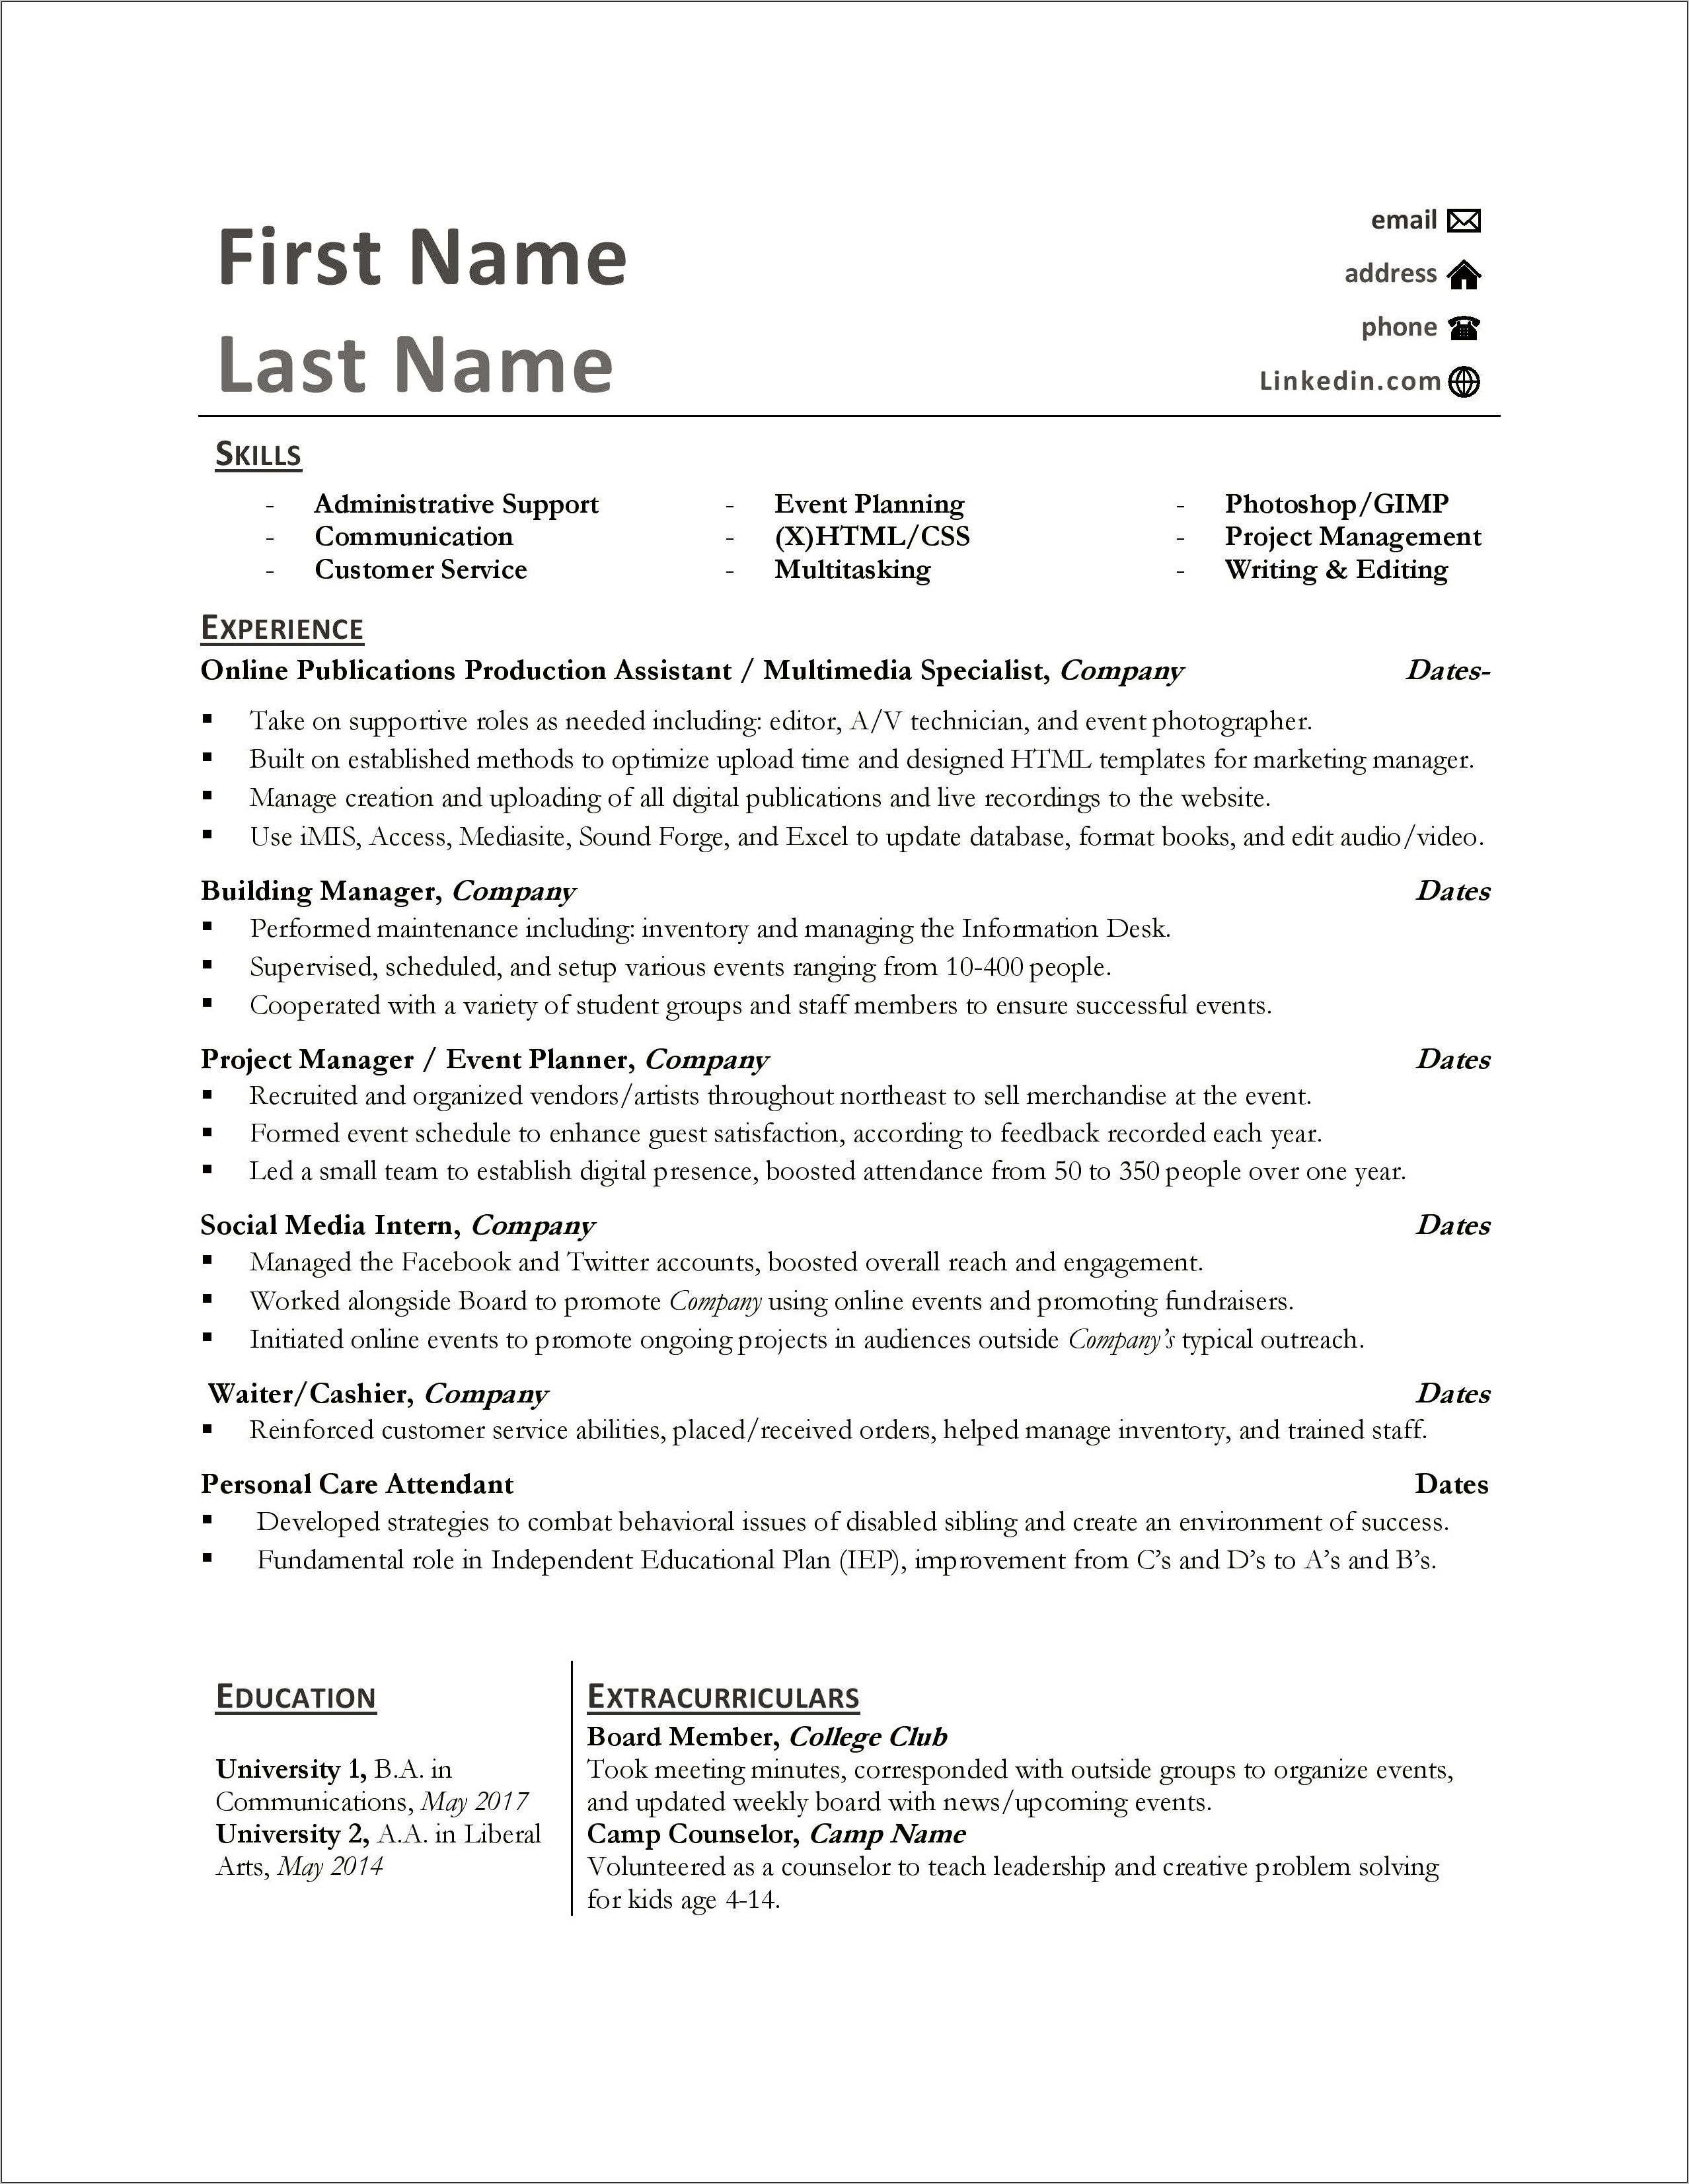 Resume Multiple Positions At One Job